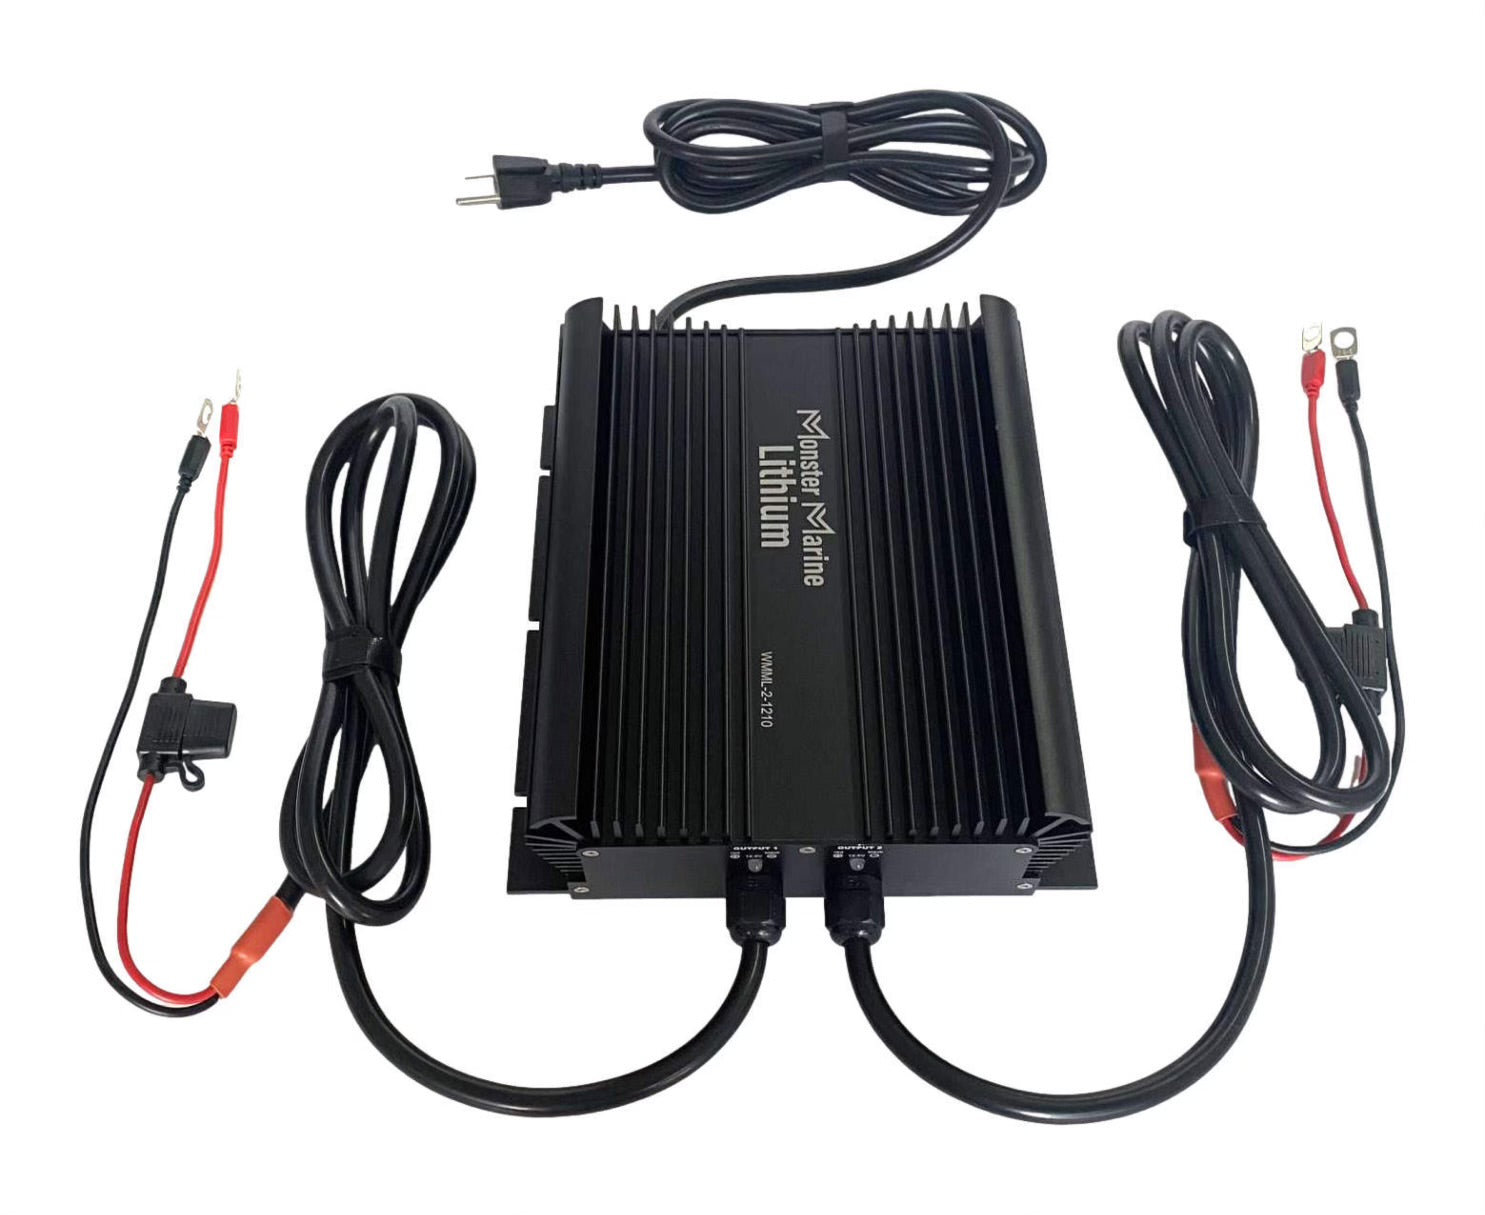 2 Bank Lithium & AGM Marine Waterproof Battery Charger